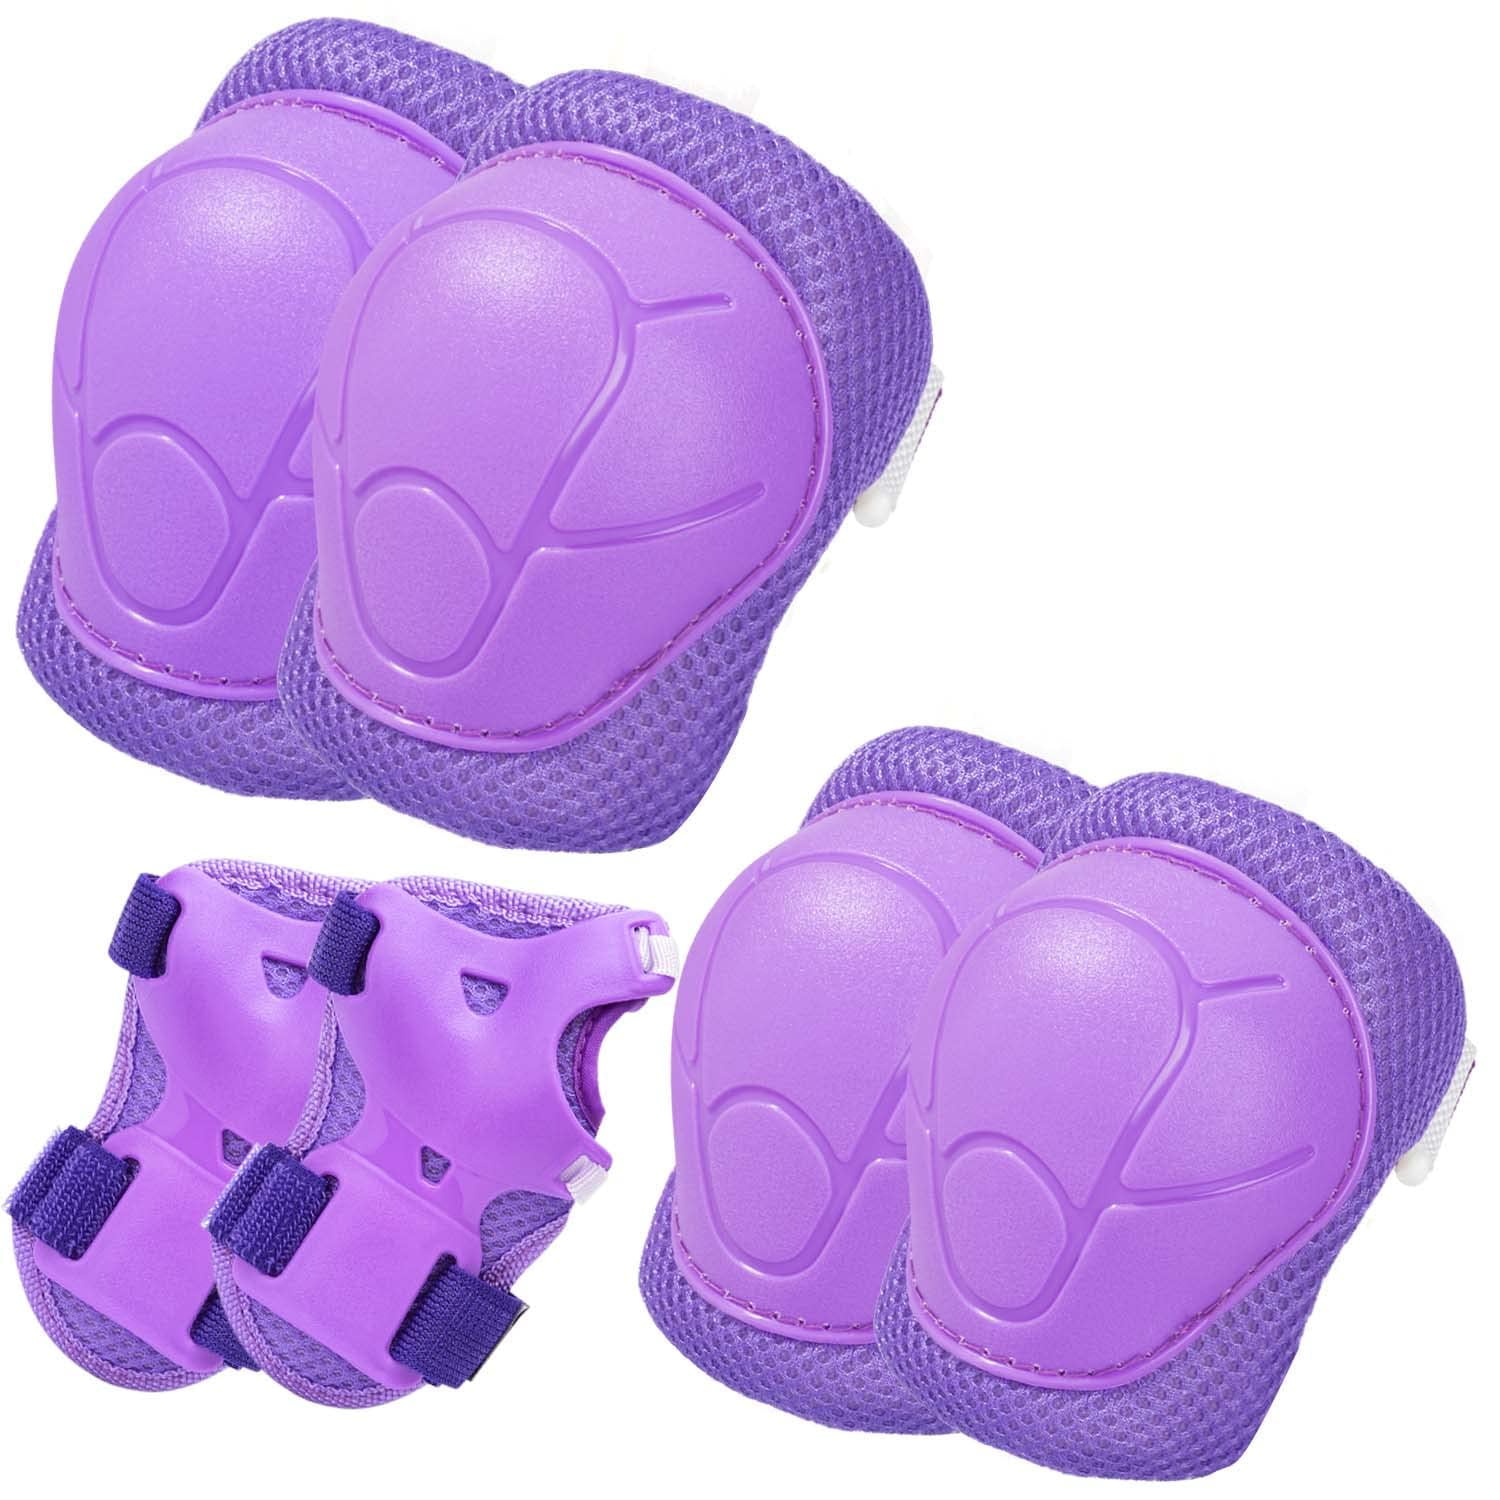 Kids/Youth Protective Gear - Knee Pads Elbow Pads Wrist Guards for Roller  Skating,Rollerblade,Skateboarding - Multi Sport Pads Set 